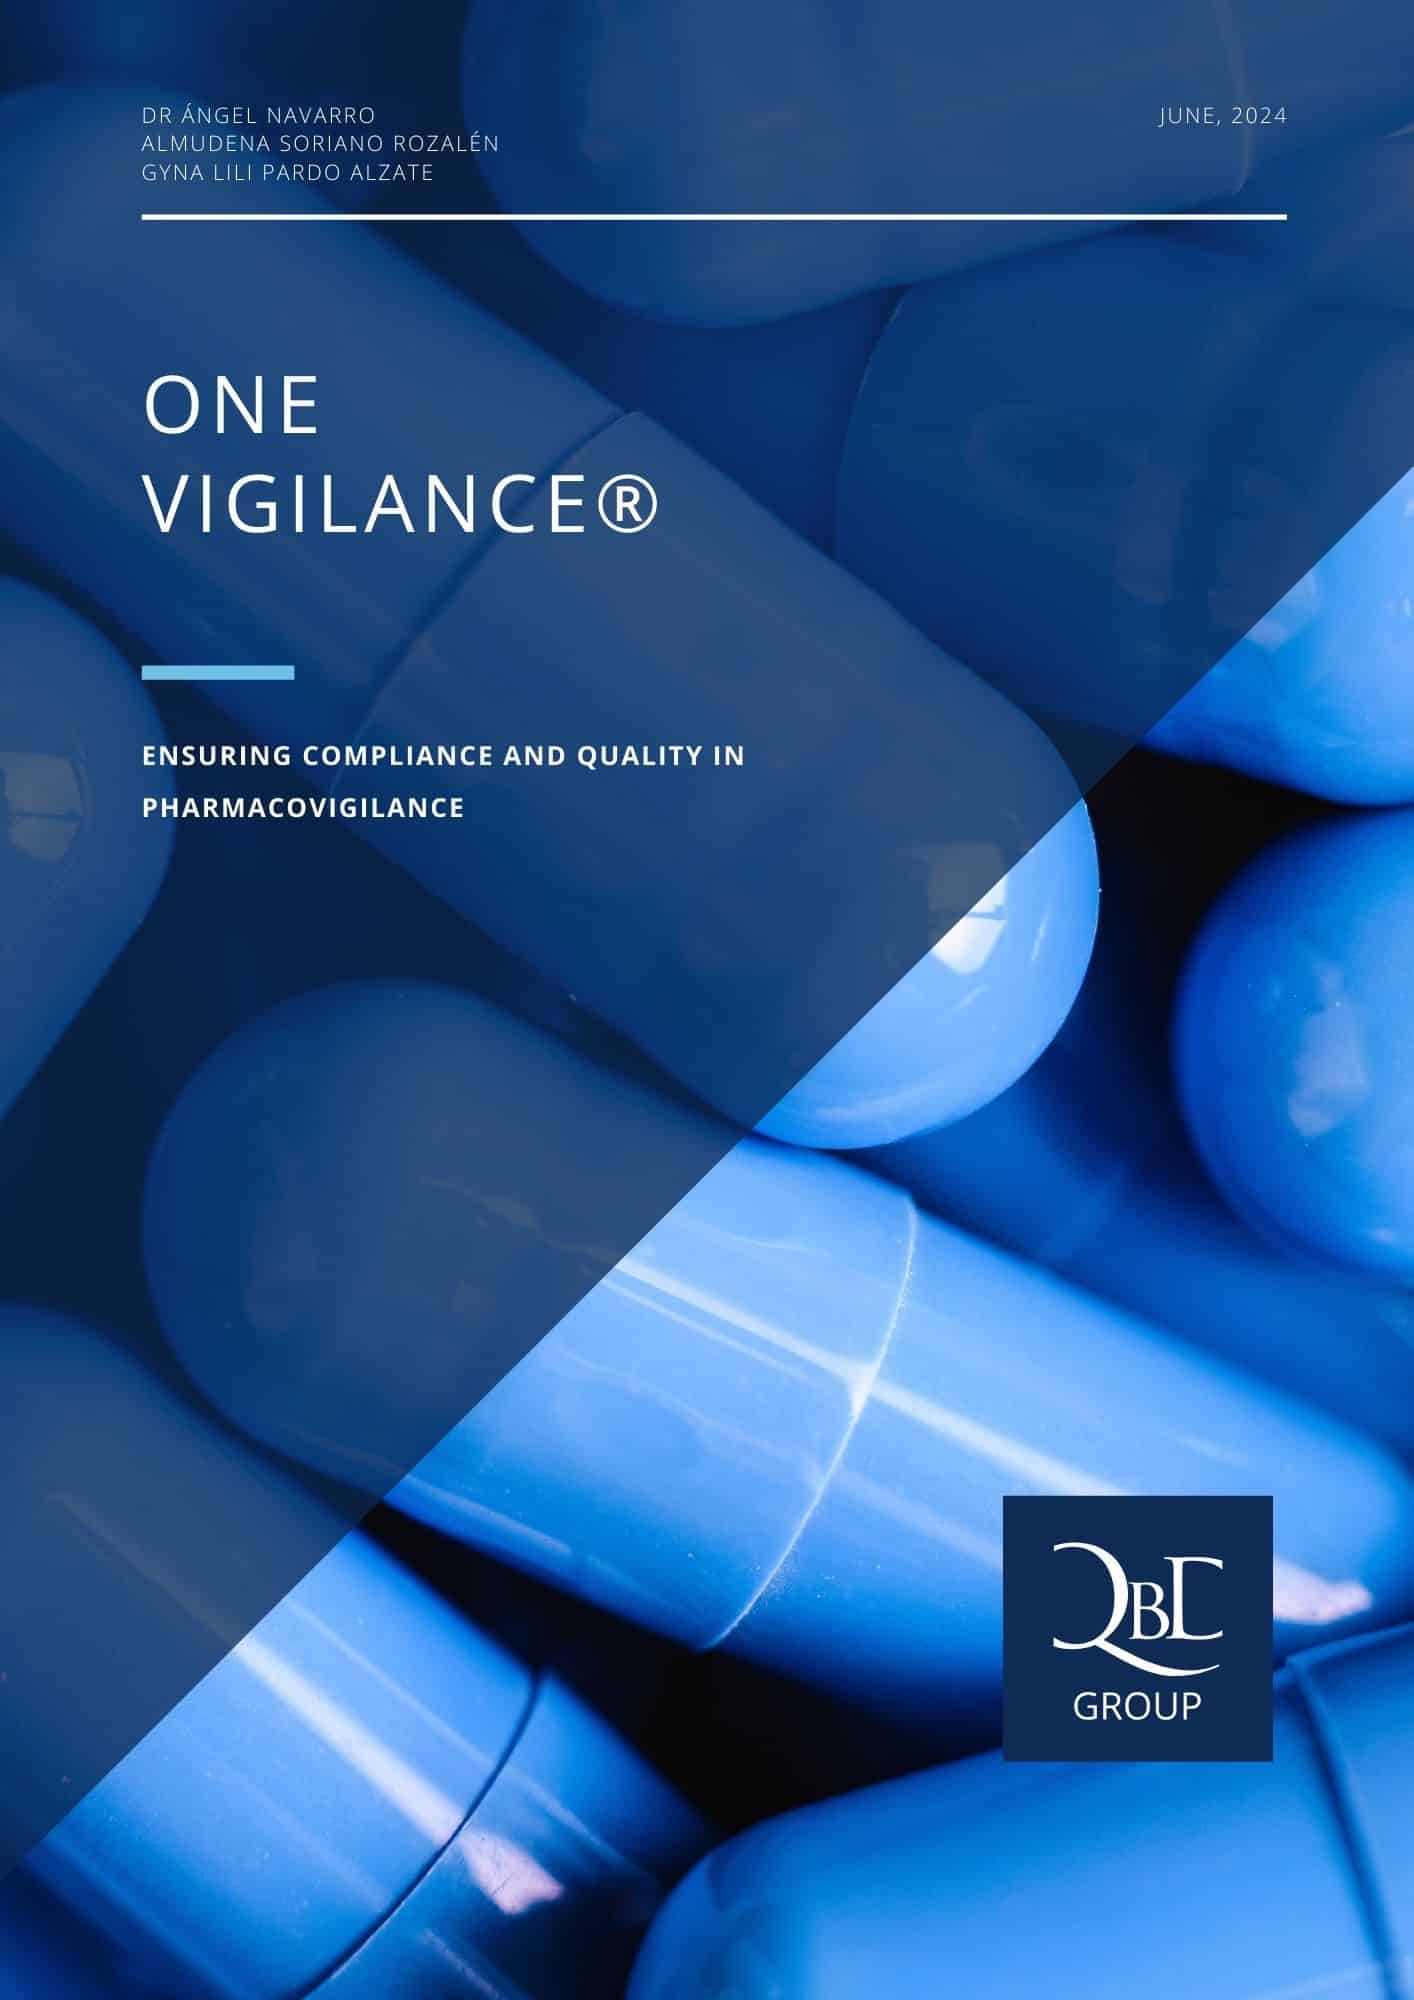 ONE Vigilance Ensuring Compliance and Quality in Pharmacovigilance